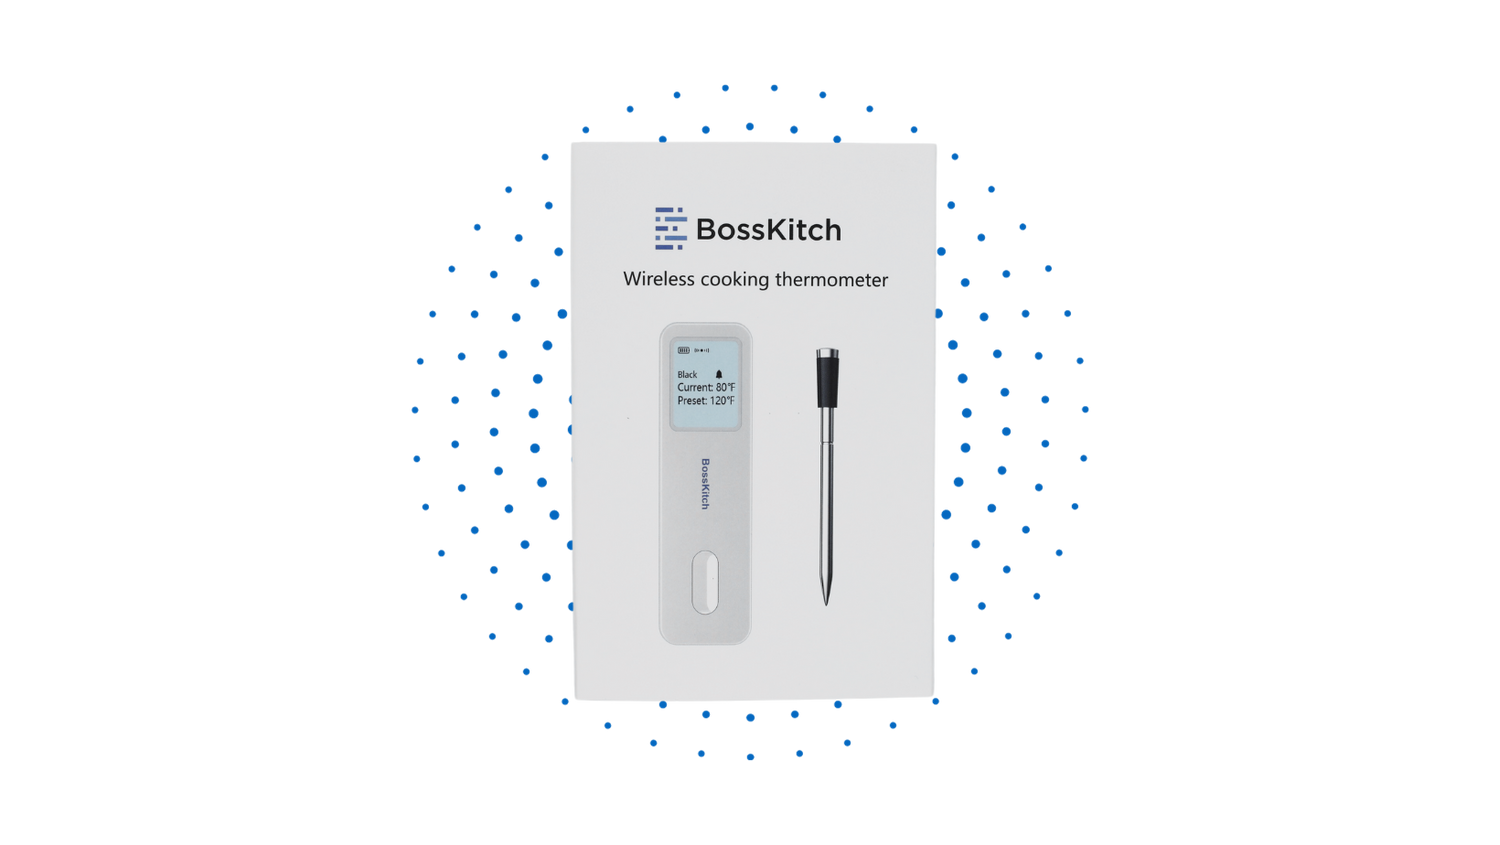 Outside packaging of the BossKitch wireless cooking thermometer